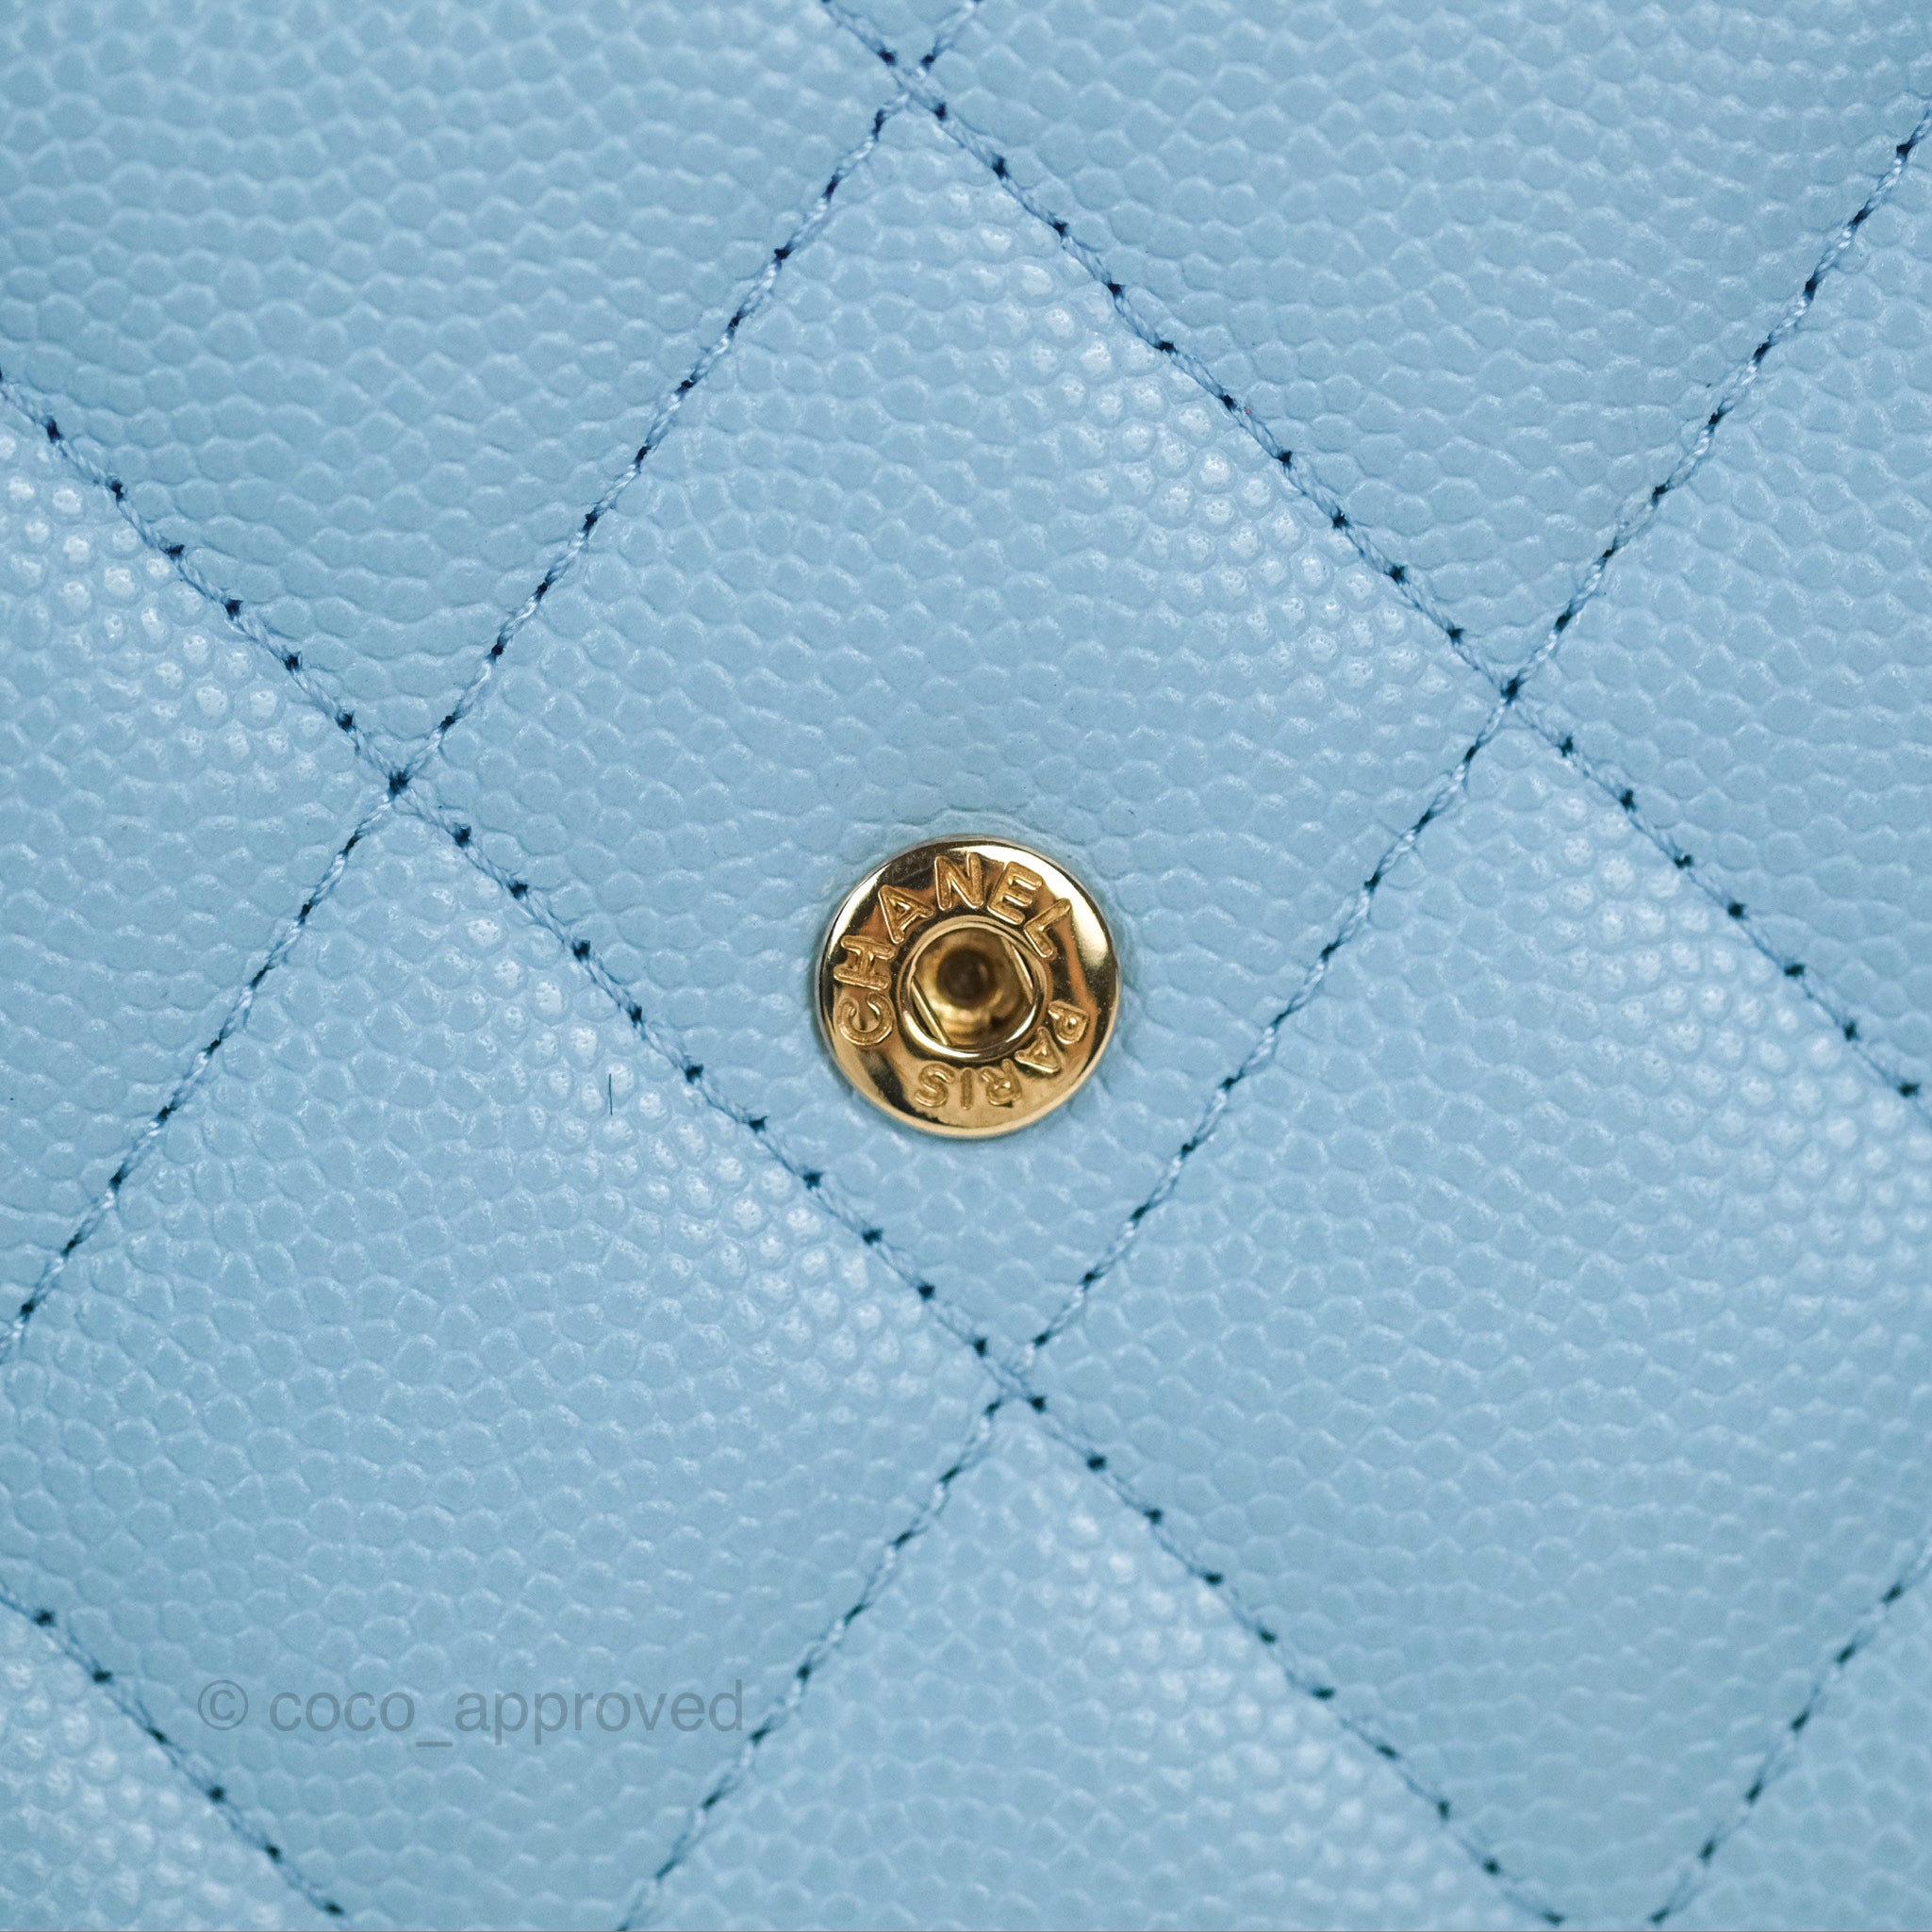 Chanel Long Flap Wallet Blue Caviar Gold Hardware – Coco Approved Studio